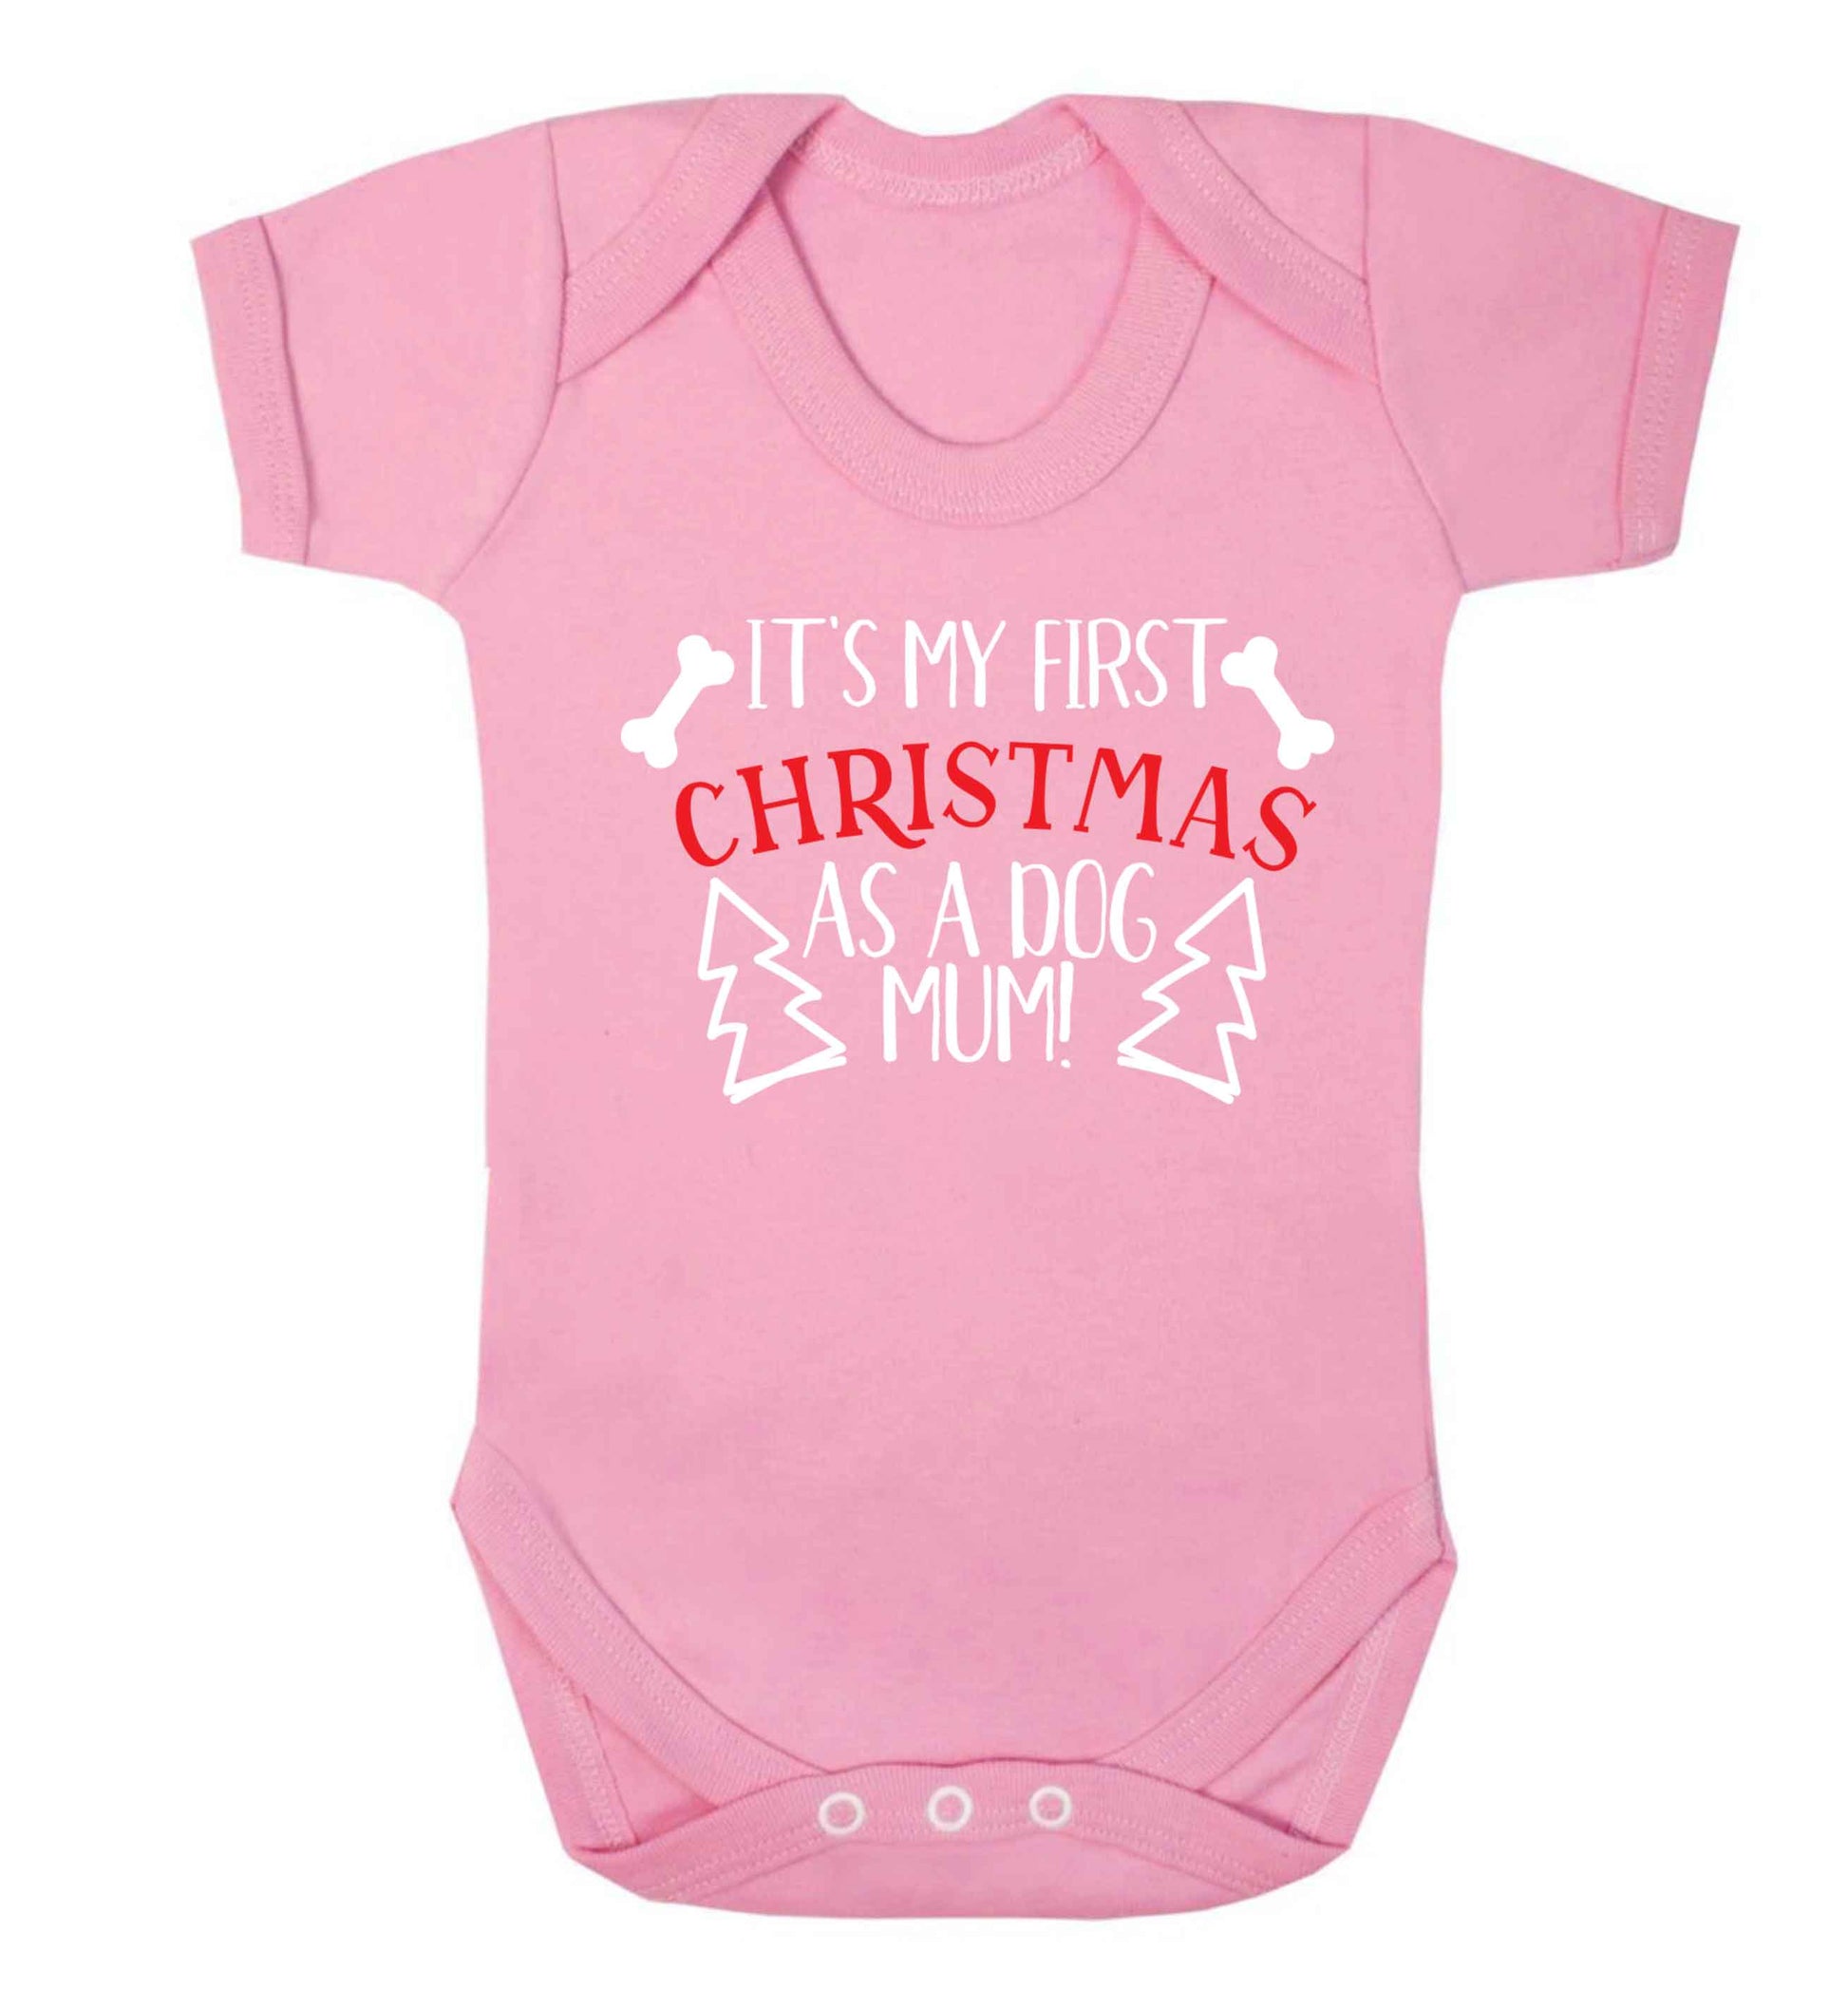 It's my first Christmas as a dog mum! Baby Vest pale pink 18-24 months